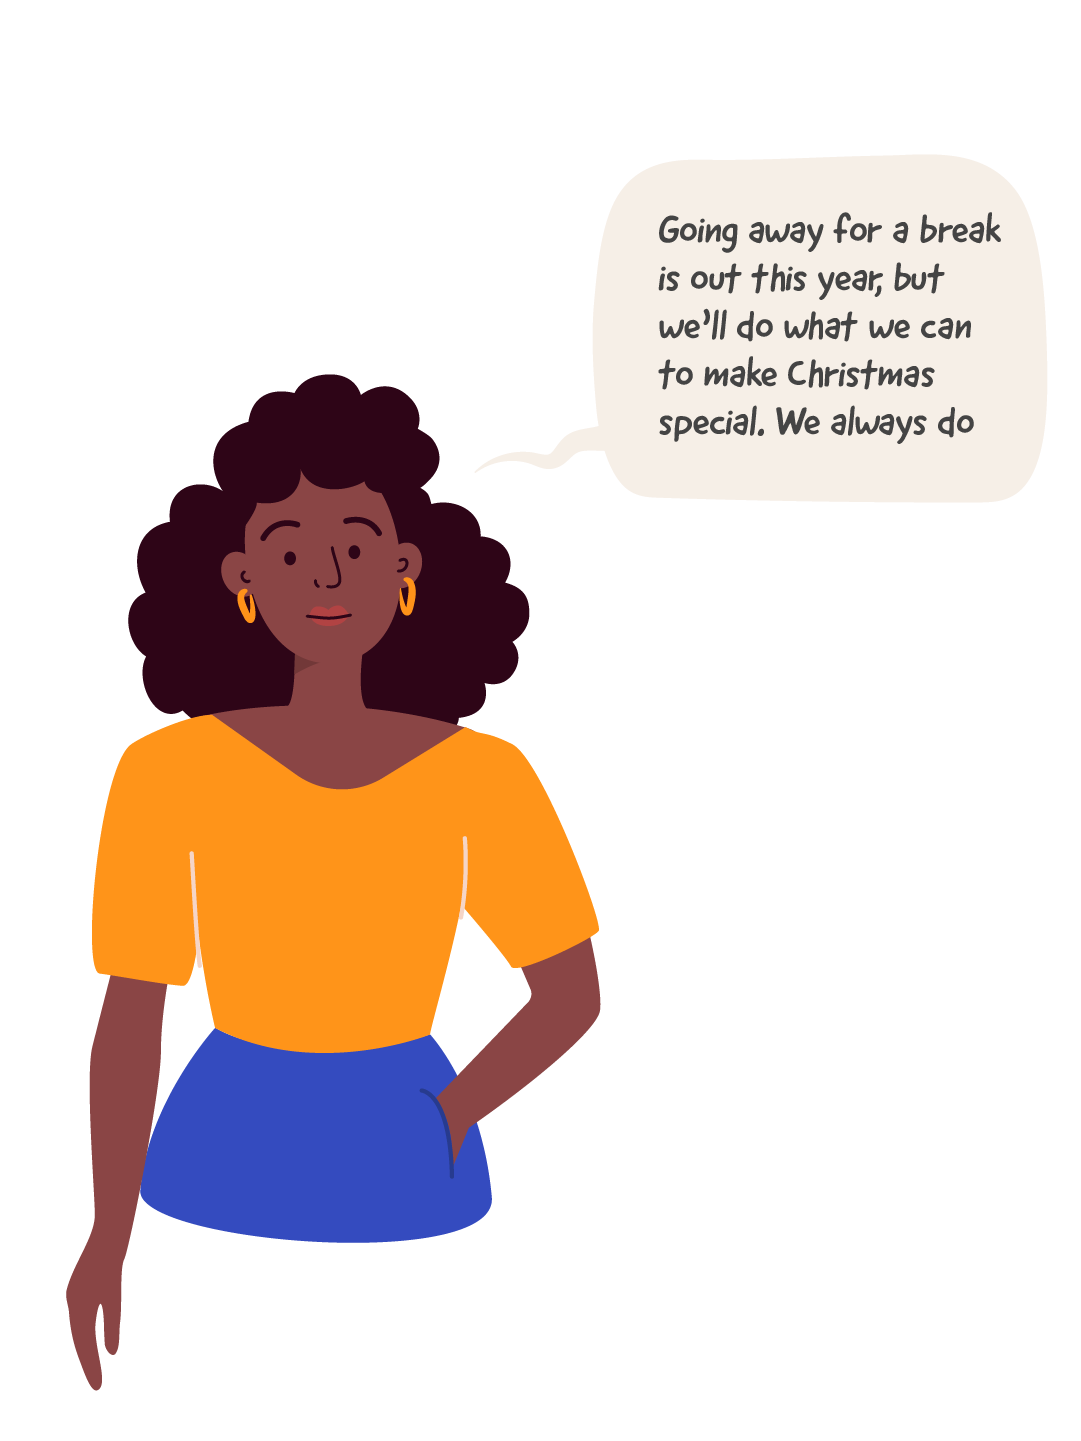 An illustration of a woman saying: Going away for a break is out this year, but we'll do what we can to make Christmas special